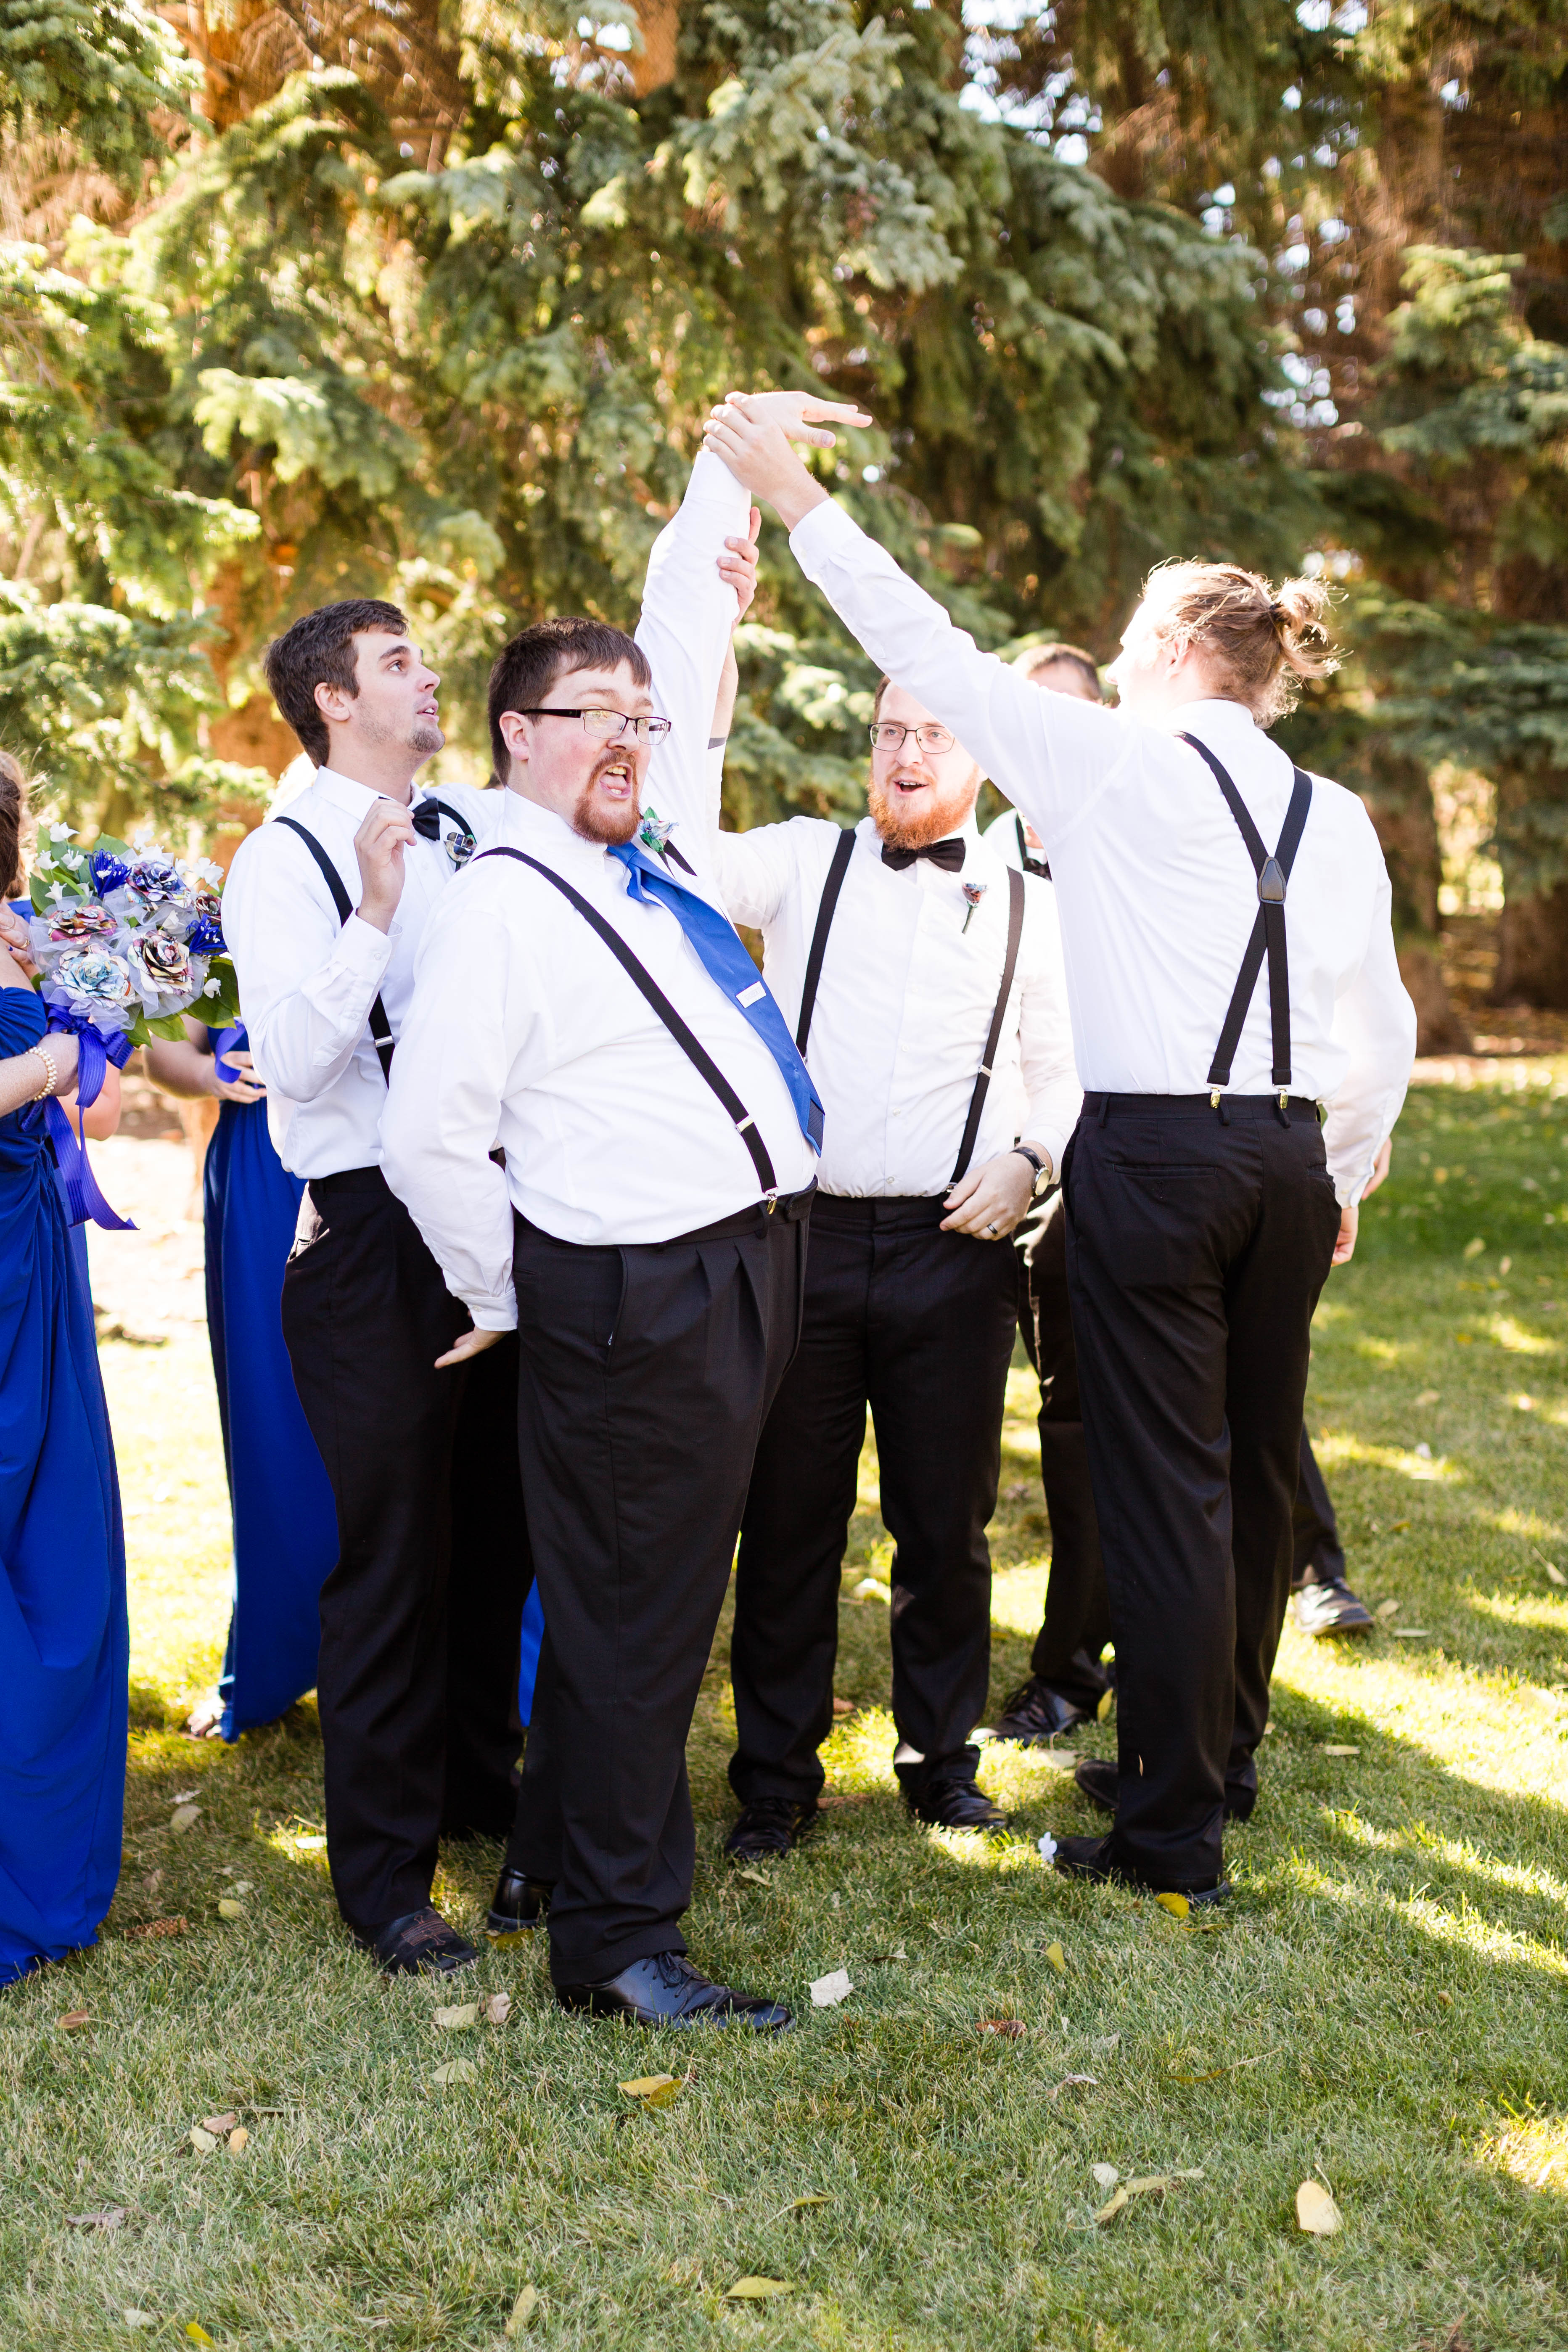 groom celebrates and shows off his ring to his groomsmen after wedding ceremony